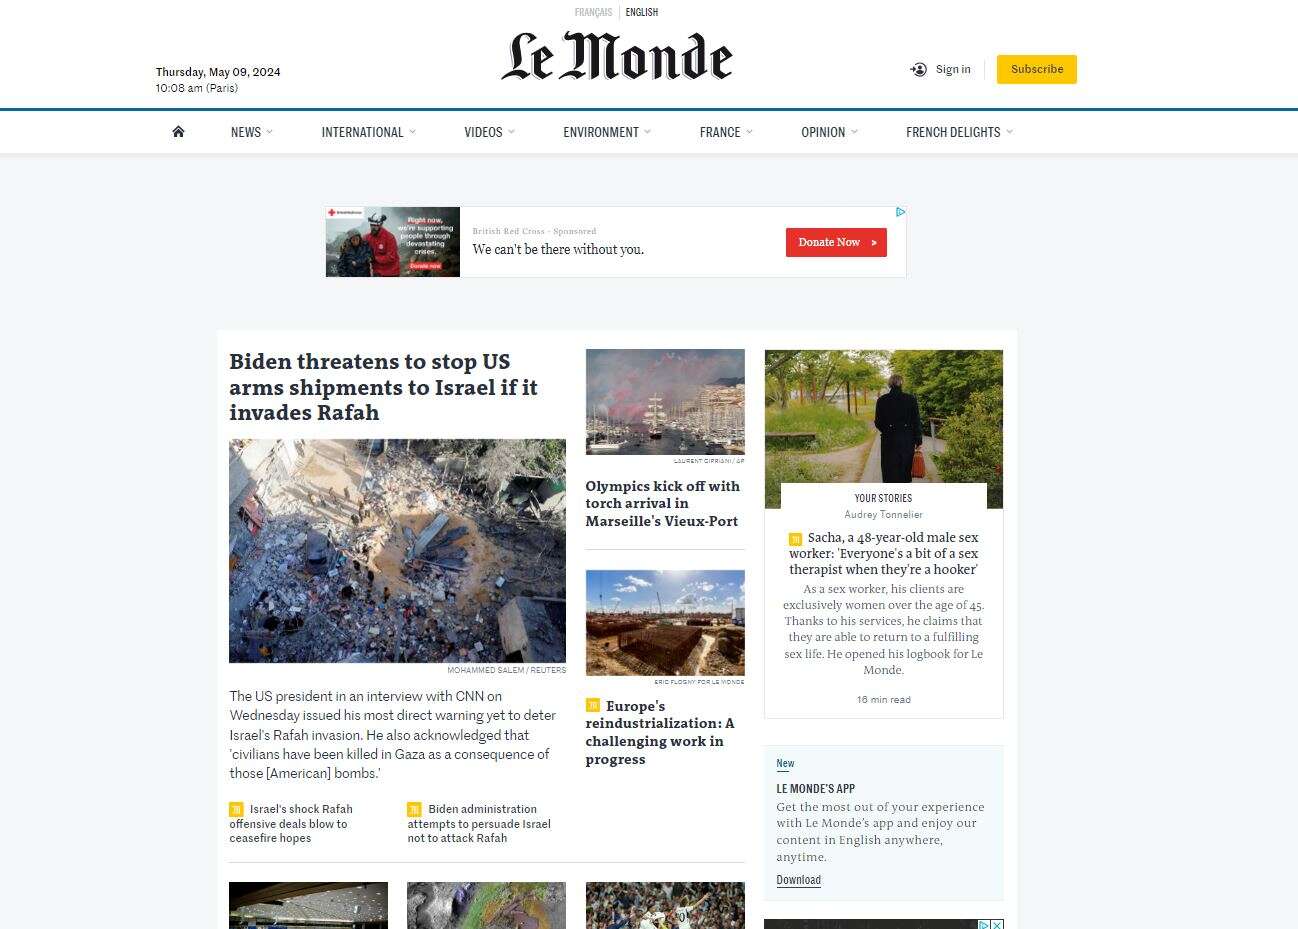 Le Monde's Olympian effort to attract more English-language subscribers